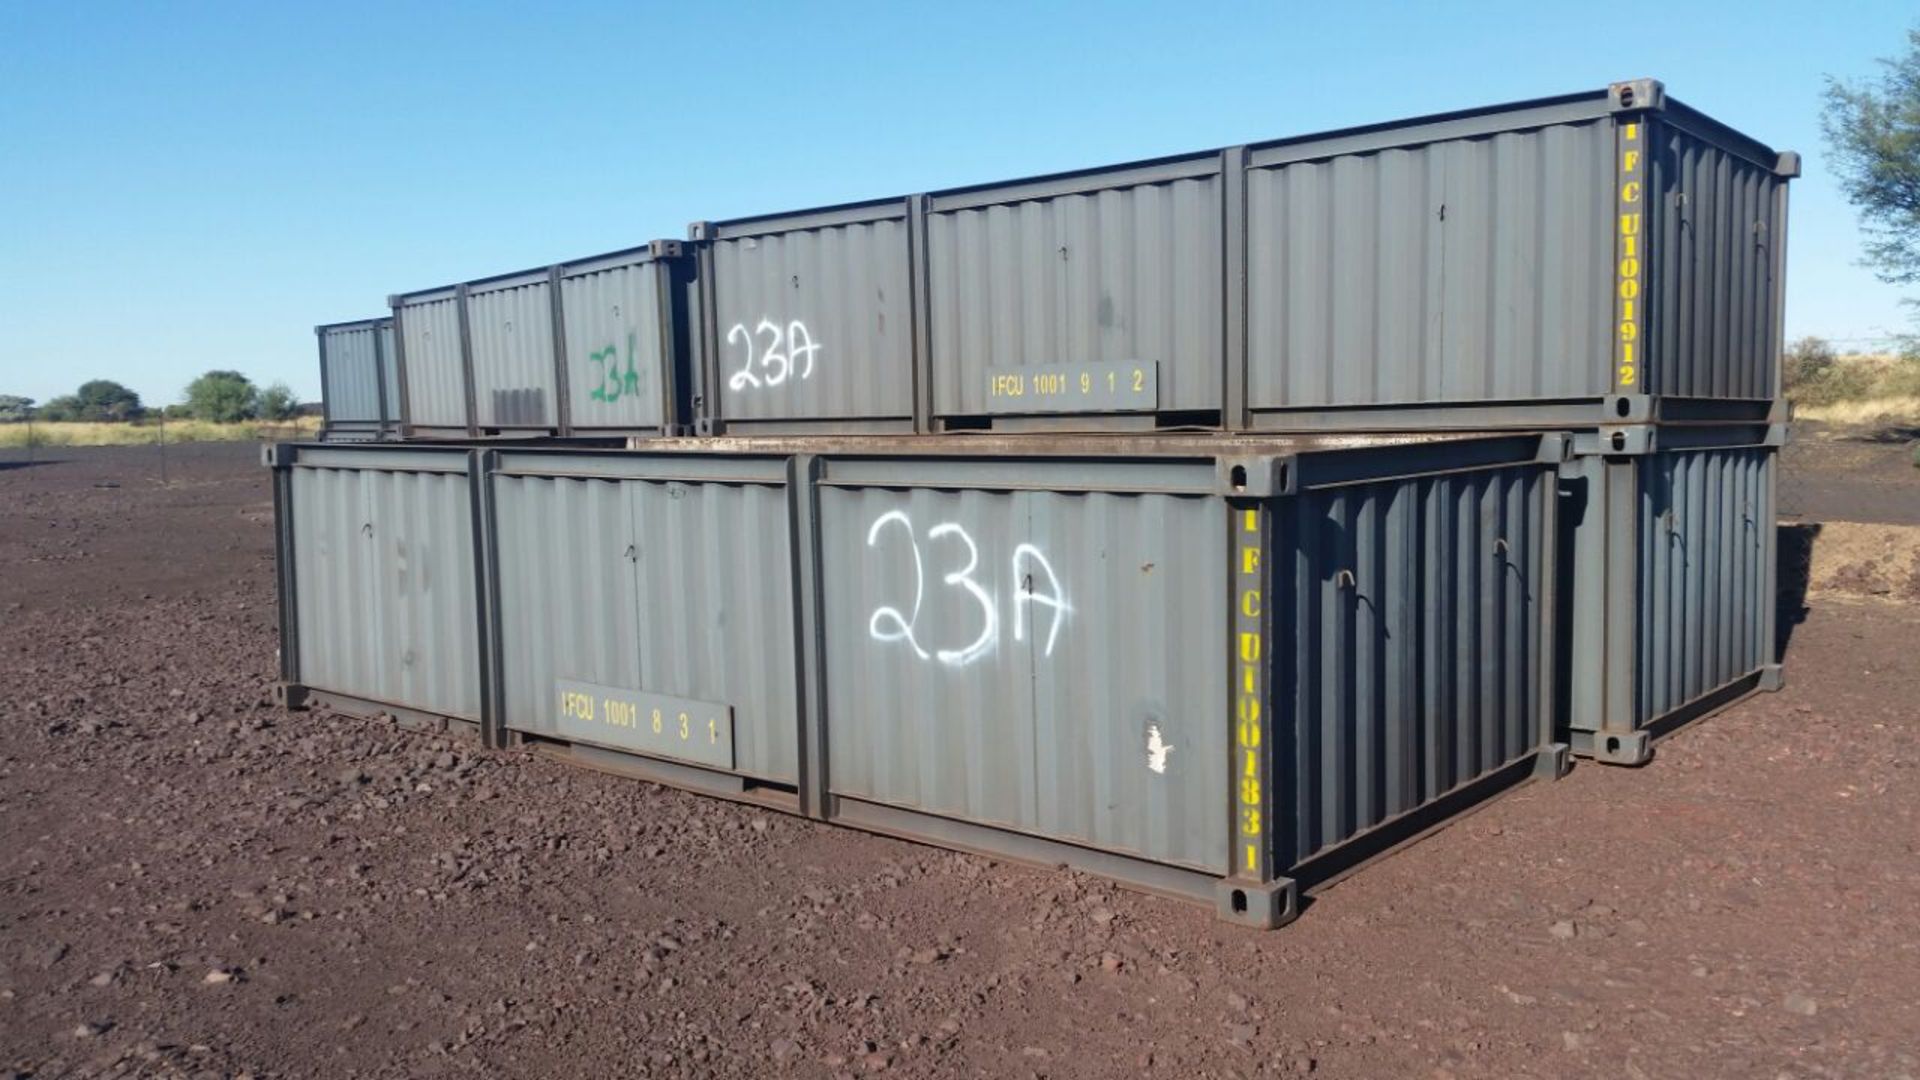 11X 6MX1.4M PARAMOUNT HALF CONTAINERS (TO BE SOLD AS ONE LOT) (BUYER TO TAKE ALL) - BID AMOUNT IS